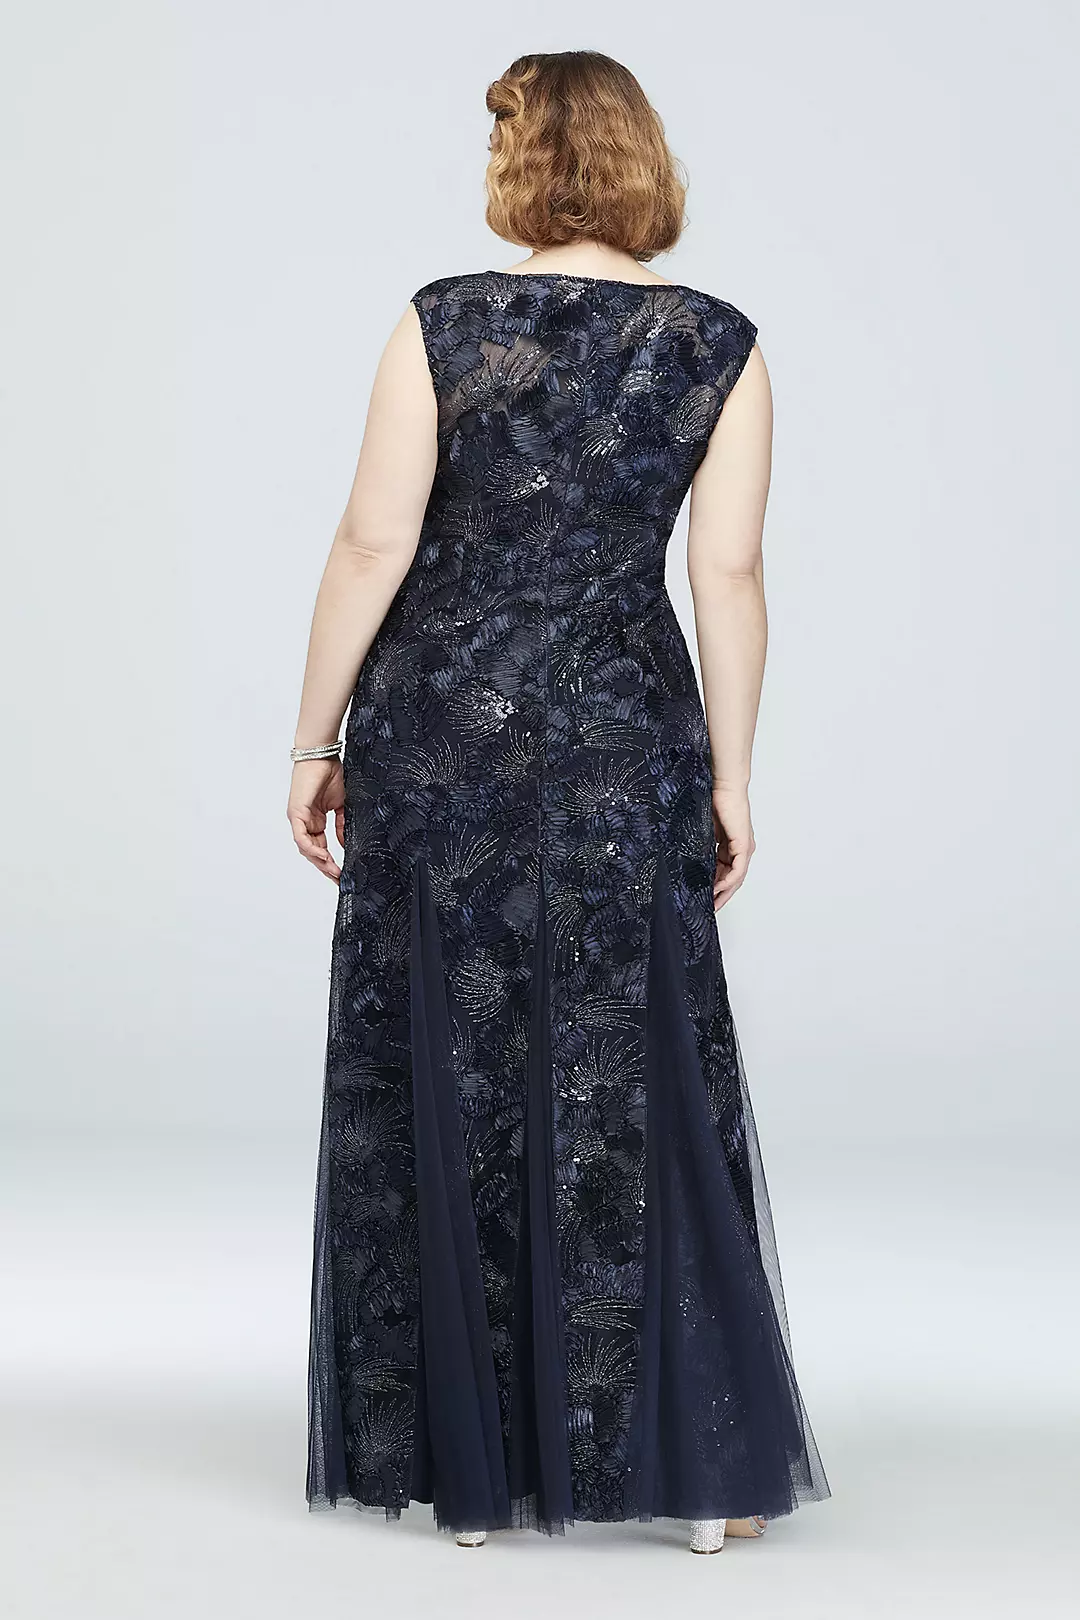 Metallic Sequin and Soutache Gown with Godets Image 2